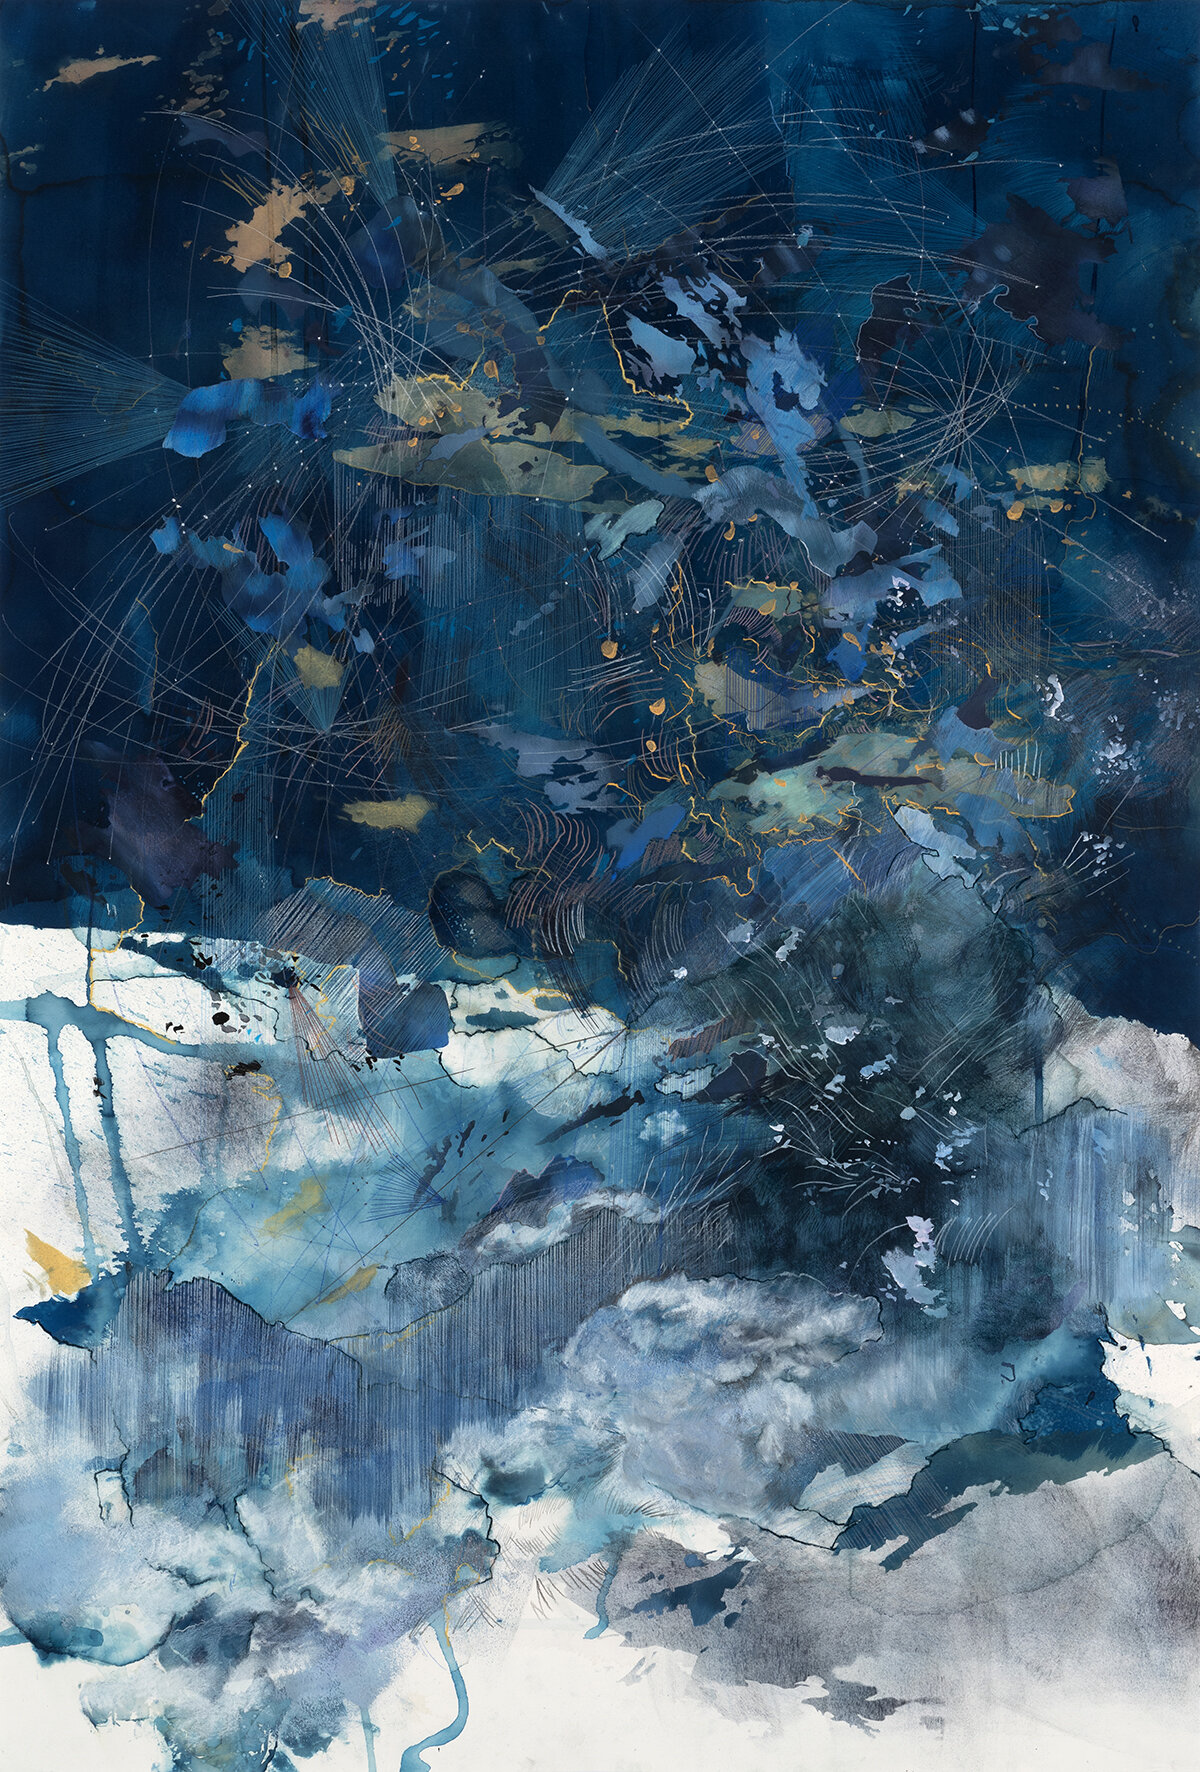  The Light that got Lost 2  2021, 51 x 34.5”, cyanotype, sodium bicarbonate, and mixed media on paper  Private Collection 